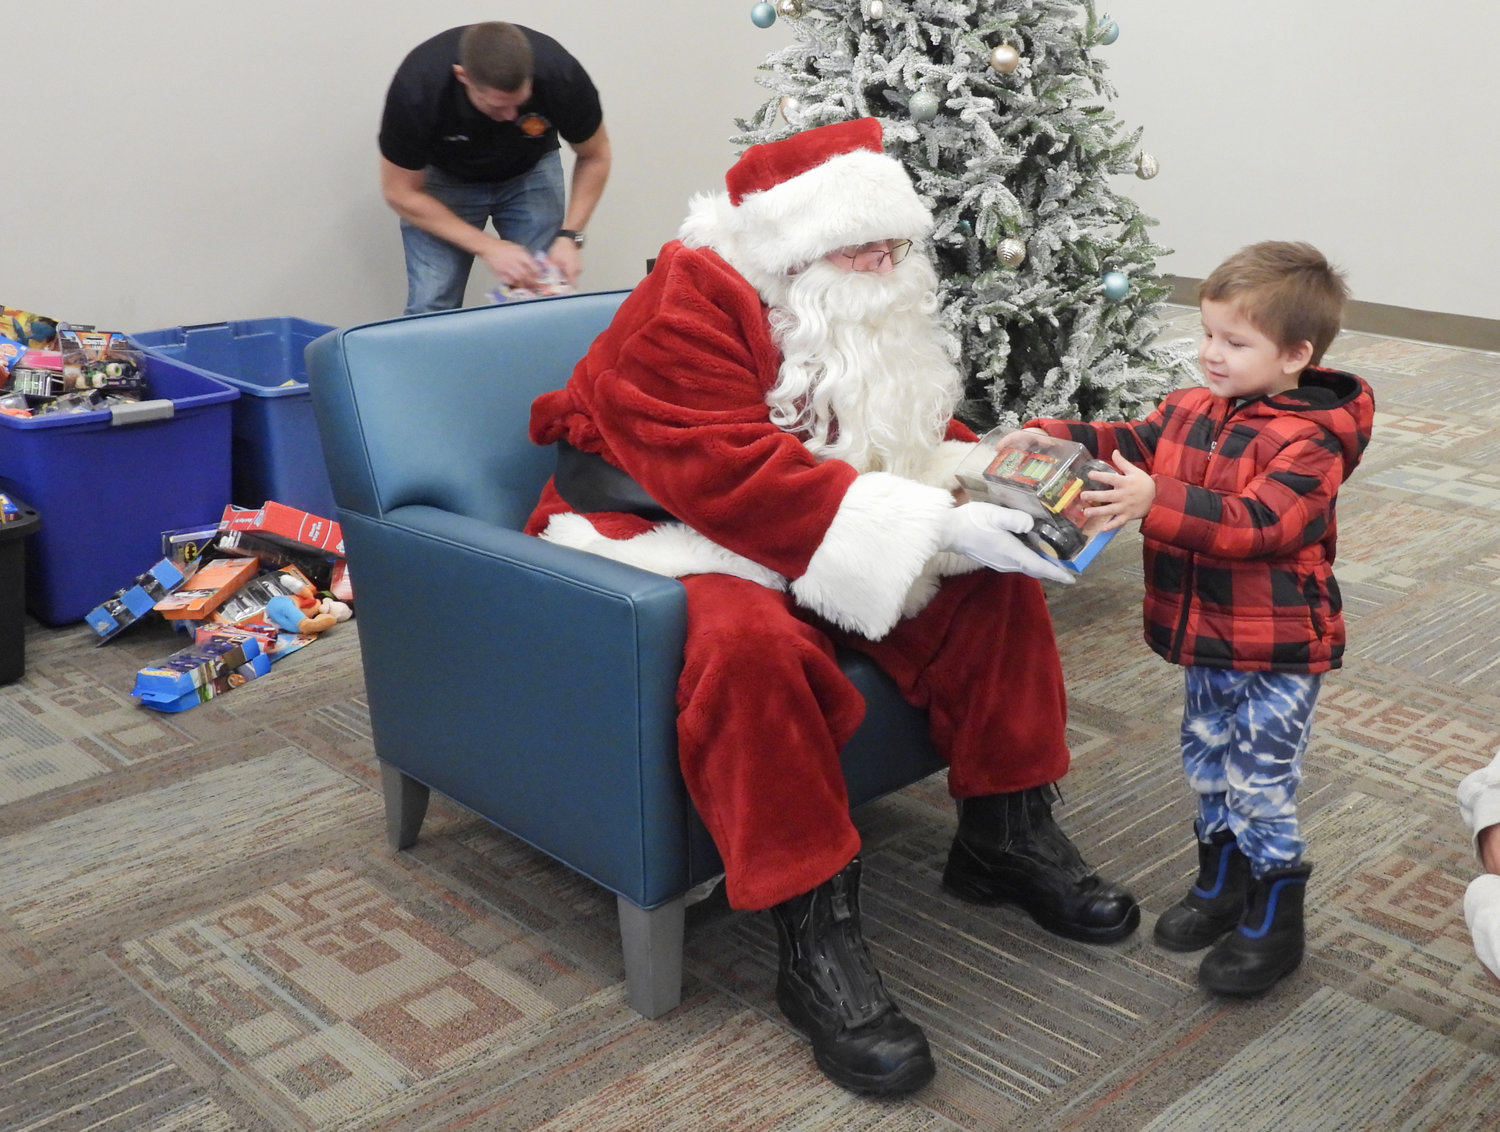 The Oneida Fire Department brings a little Christmas cheer to area children with the help of Santa Claus, listening to their Christmas wishes and giving them a toy and some treats to take home on Saturday, Dec. 3. Pictured is three-year-old Chance Thomas of Oneida, happily receiving a gift from Santa Claus.